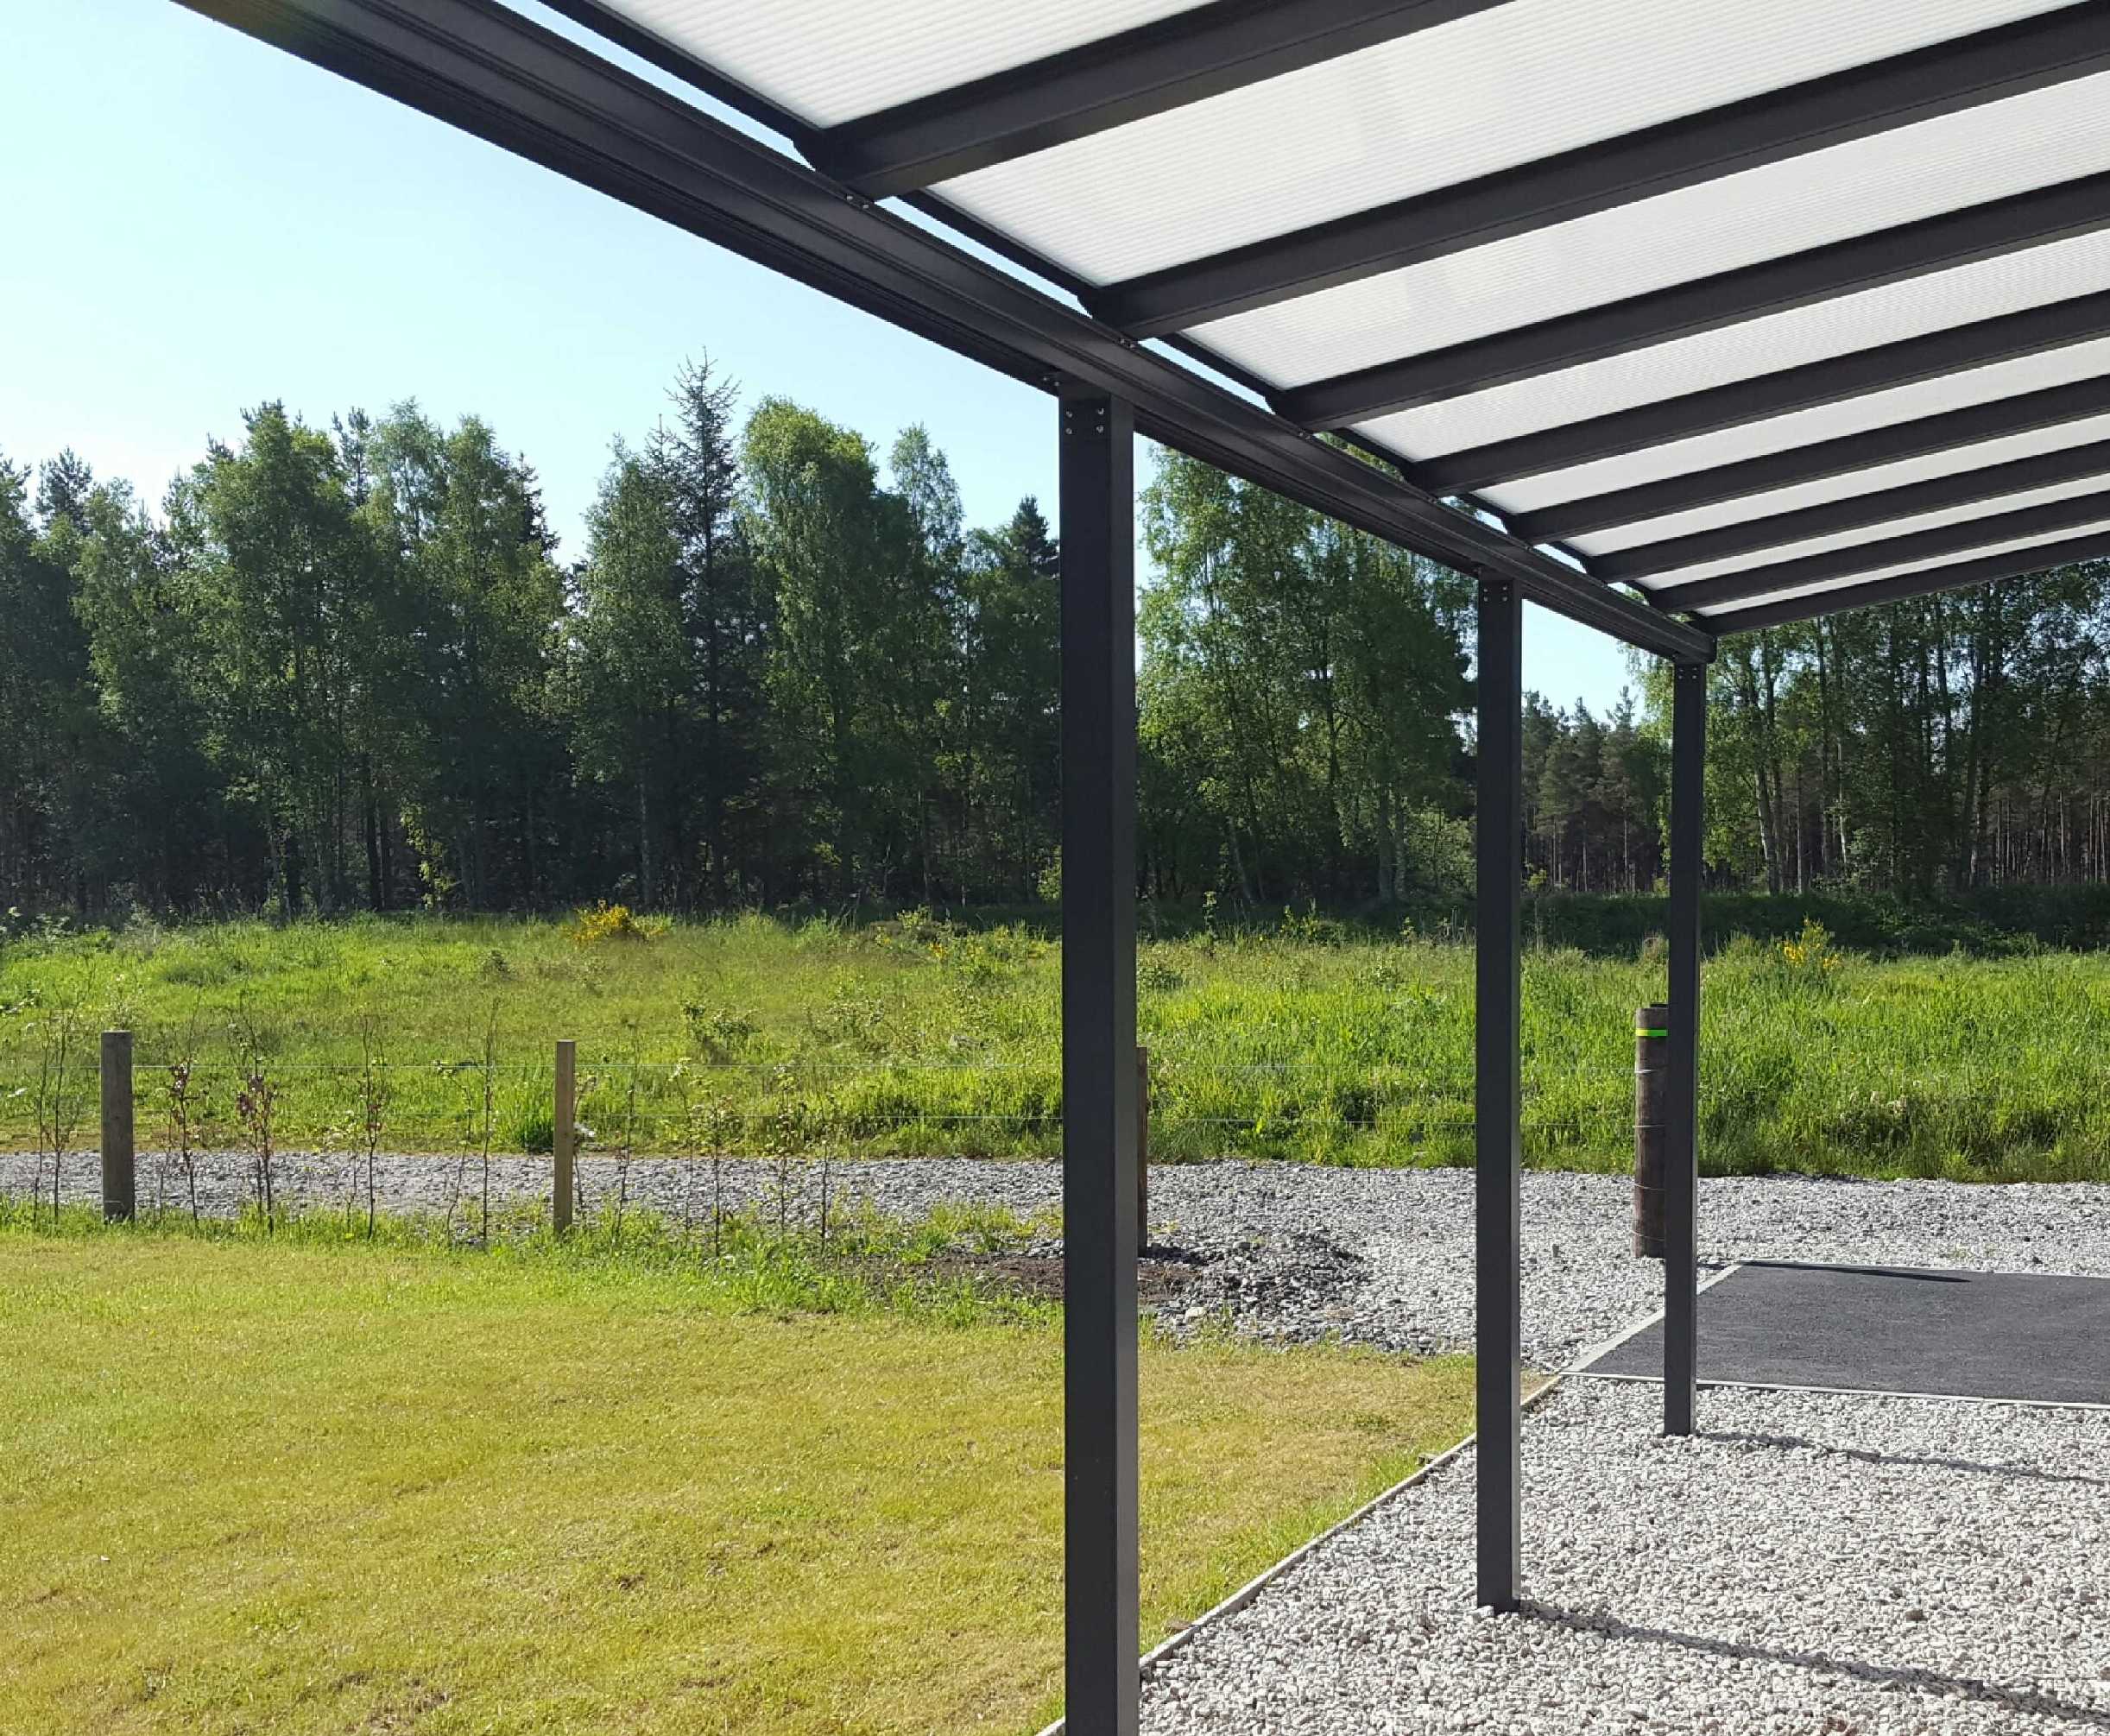 Omega Smart Lean-To Canopy, Anthracite Grey, 6mm Glass Clear Plate Polycarbonate Glazing - 4.9m (W) x 3.5m (P), (3) Supporting Posts